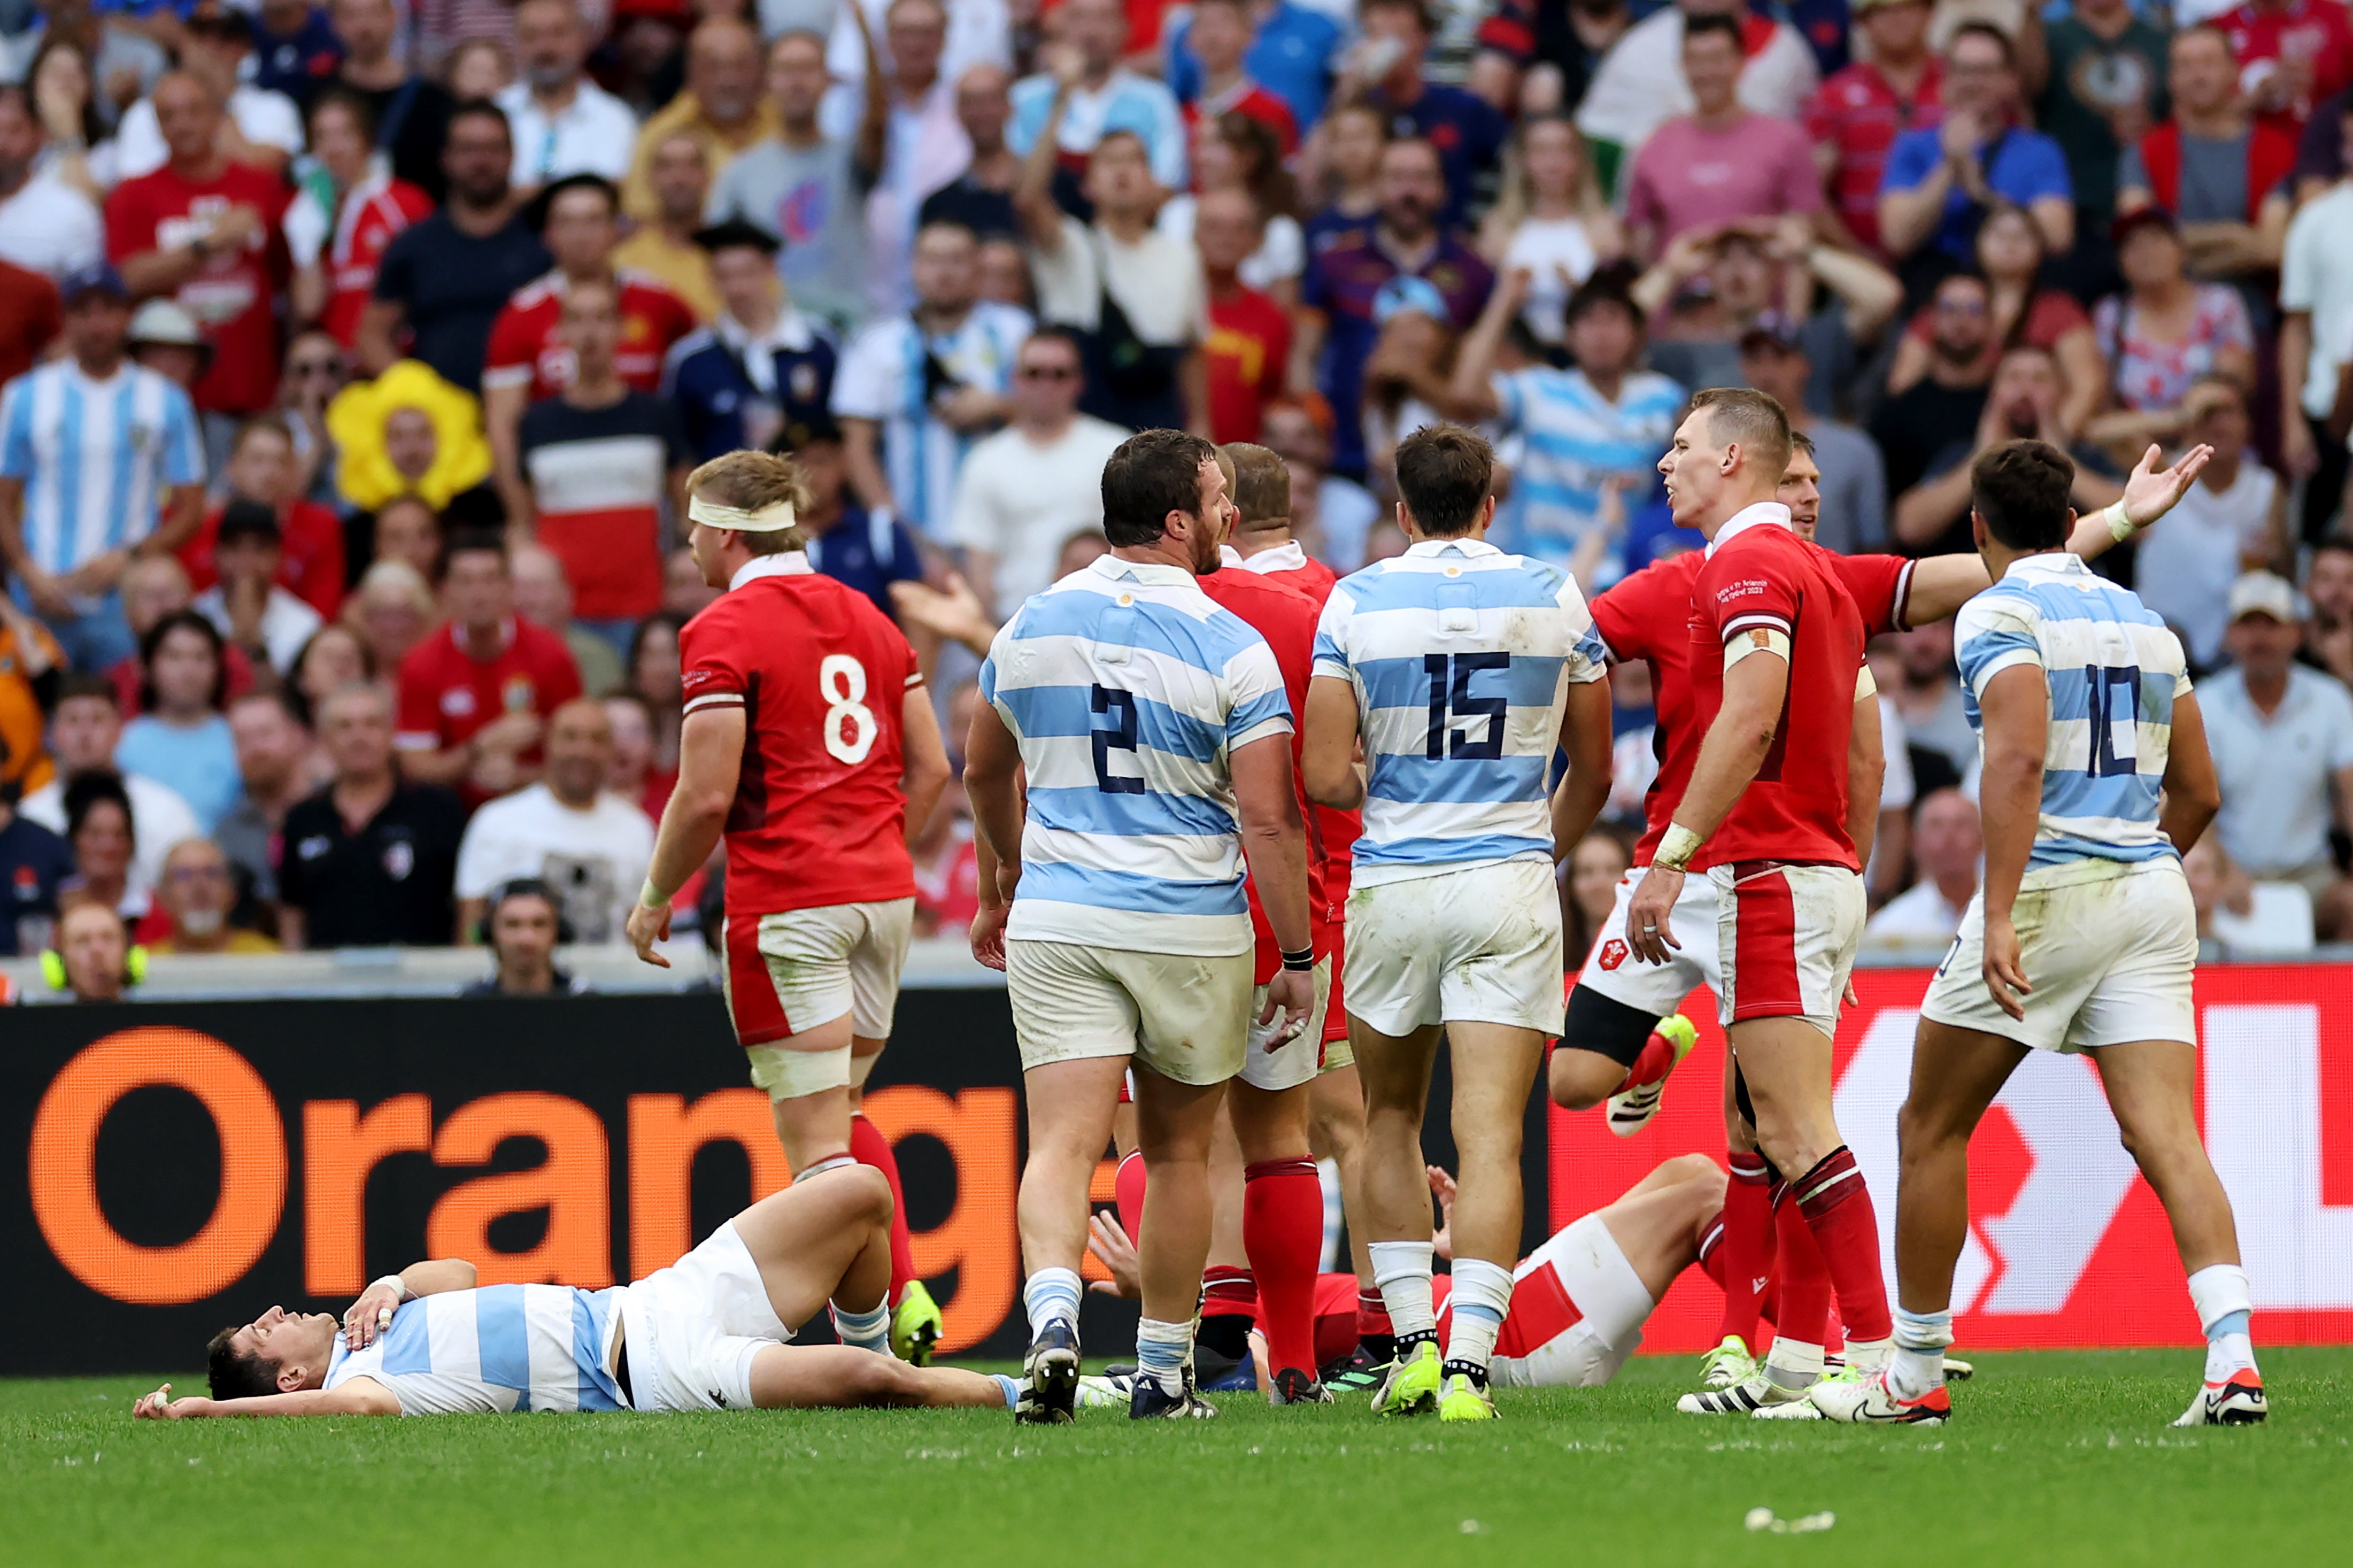 Tomas Cubelli of Argentina lies on the floor after being shoulder-charged off the ball by Josh Adams of Wales